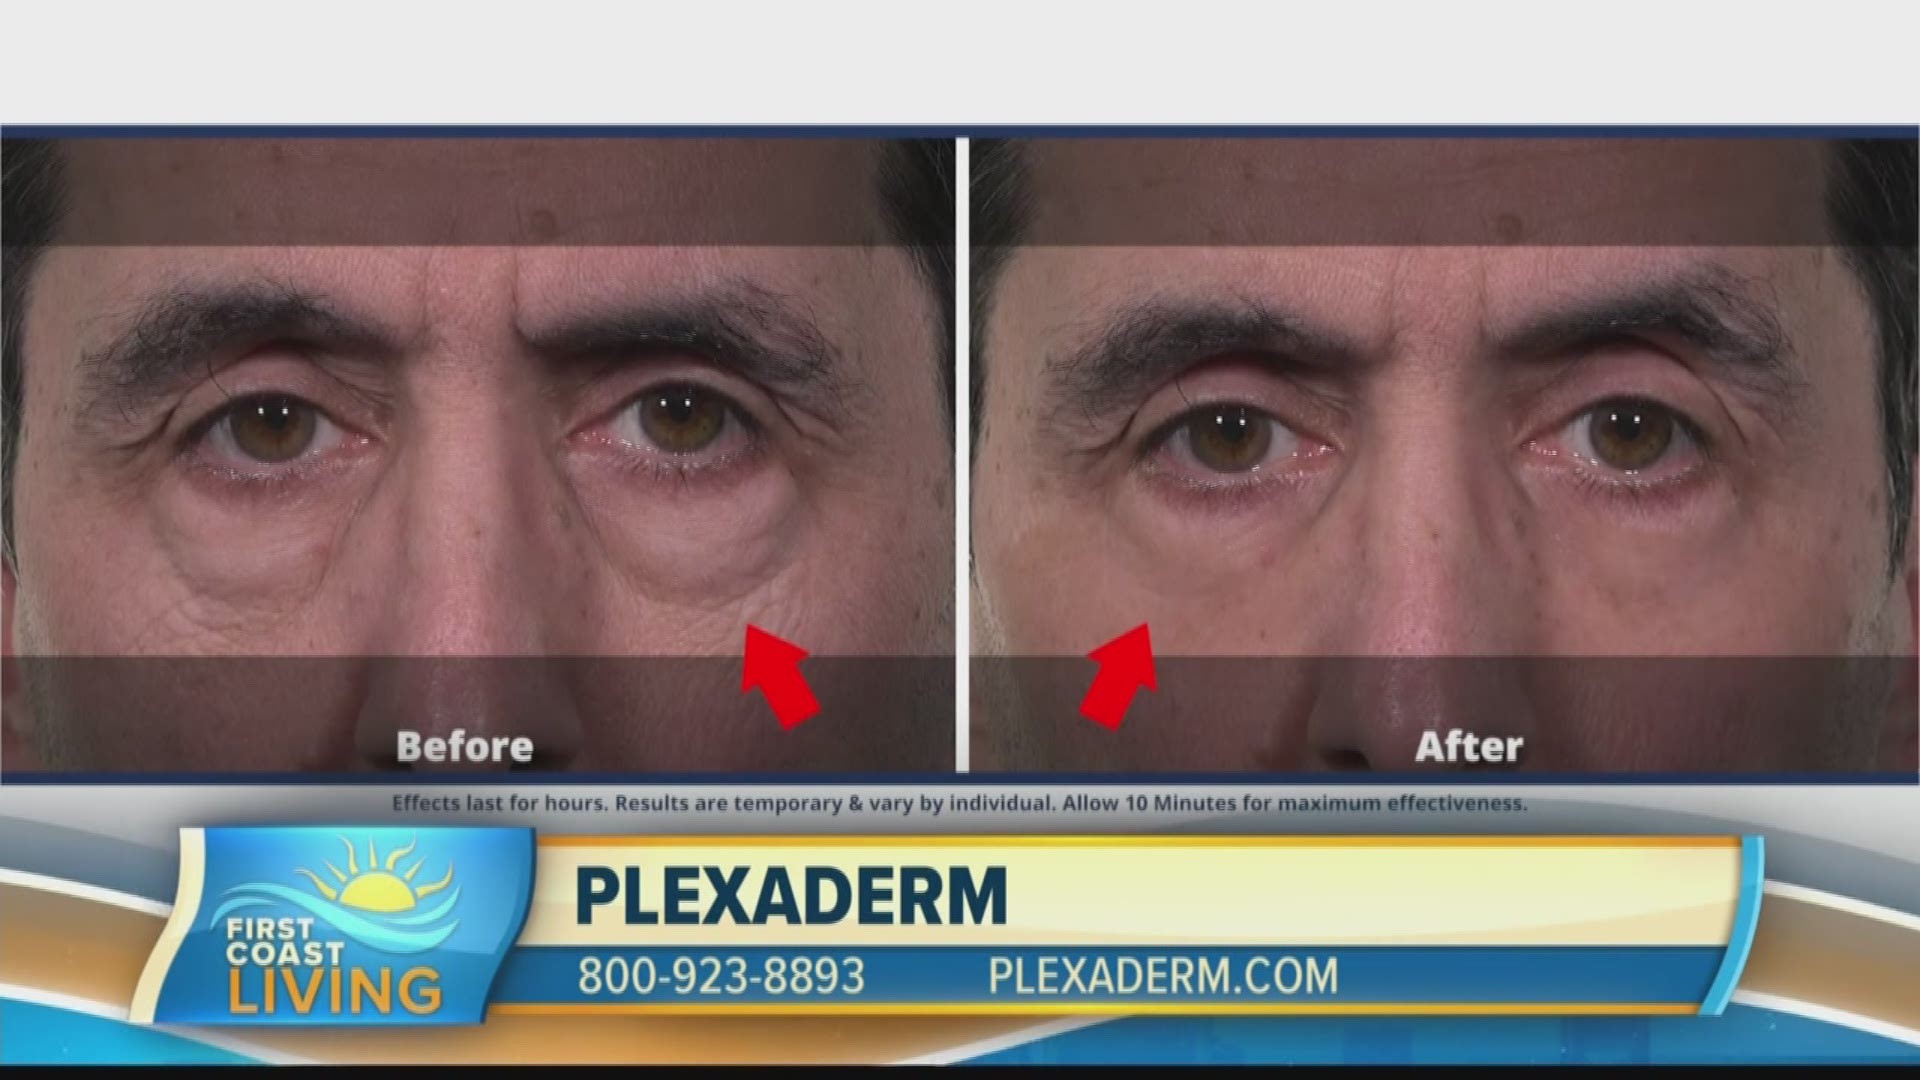 Check out Plexaderm if you're trying to get rid of those key signs of aging!